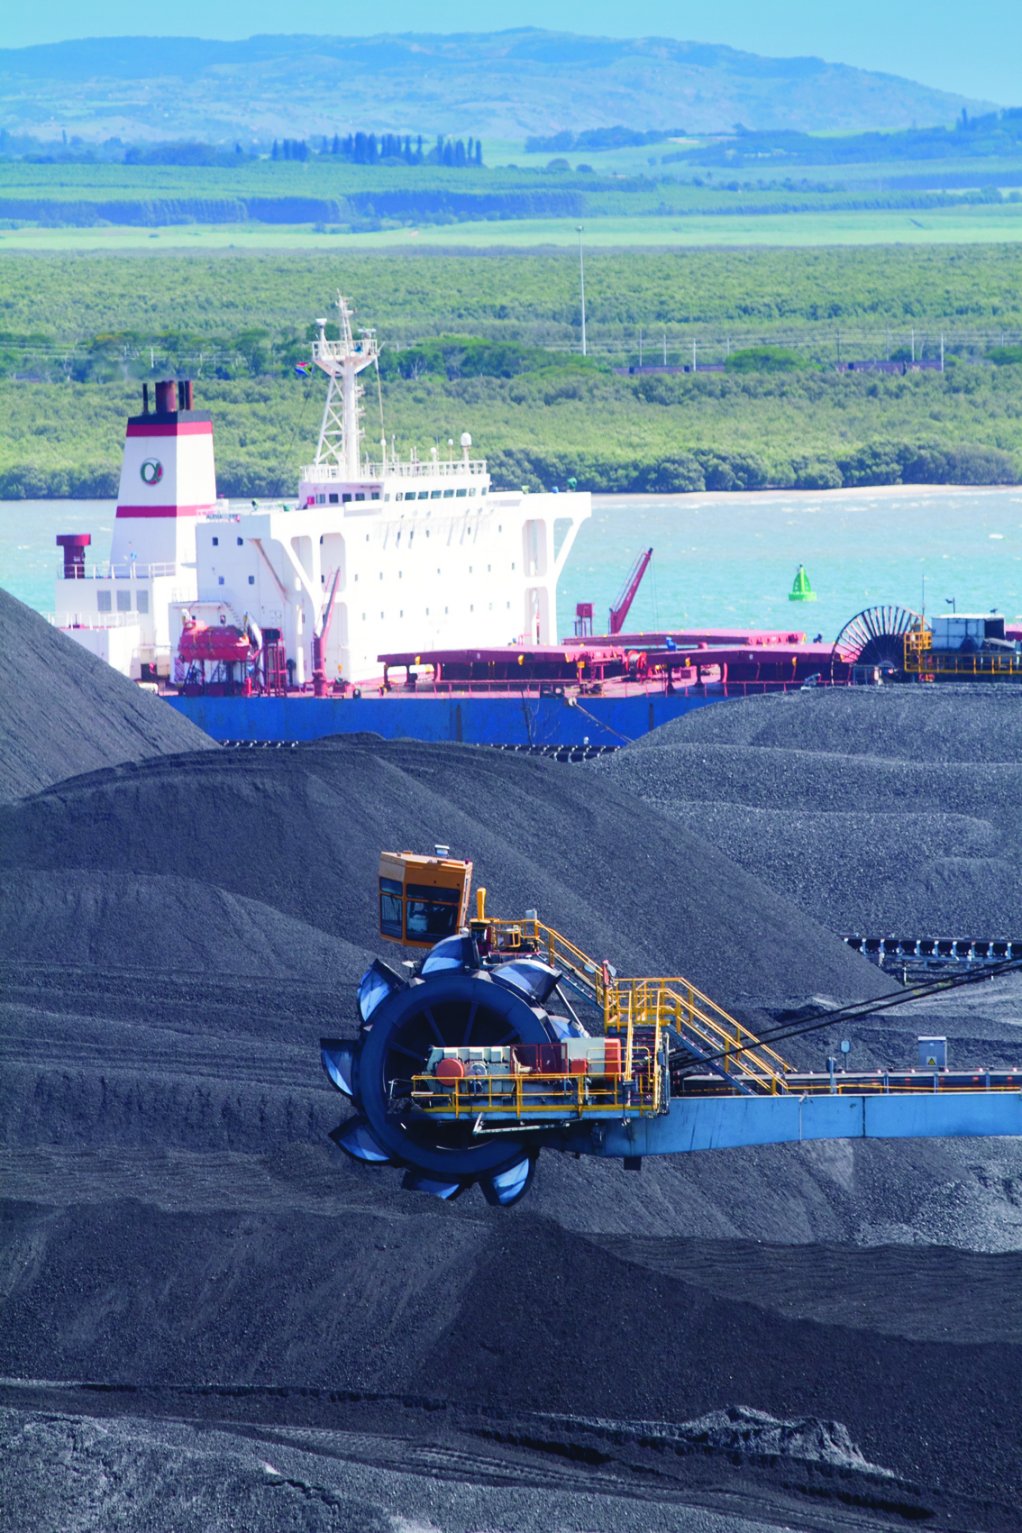 FIRST CLASS Richards Bay Coal Terminals with breaking coal delivery record
